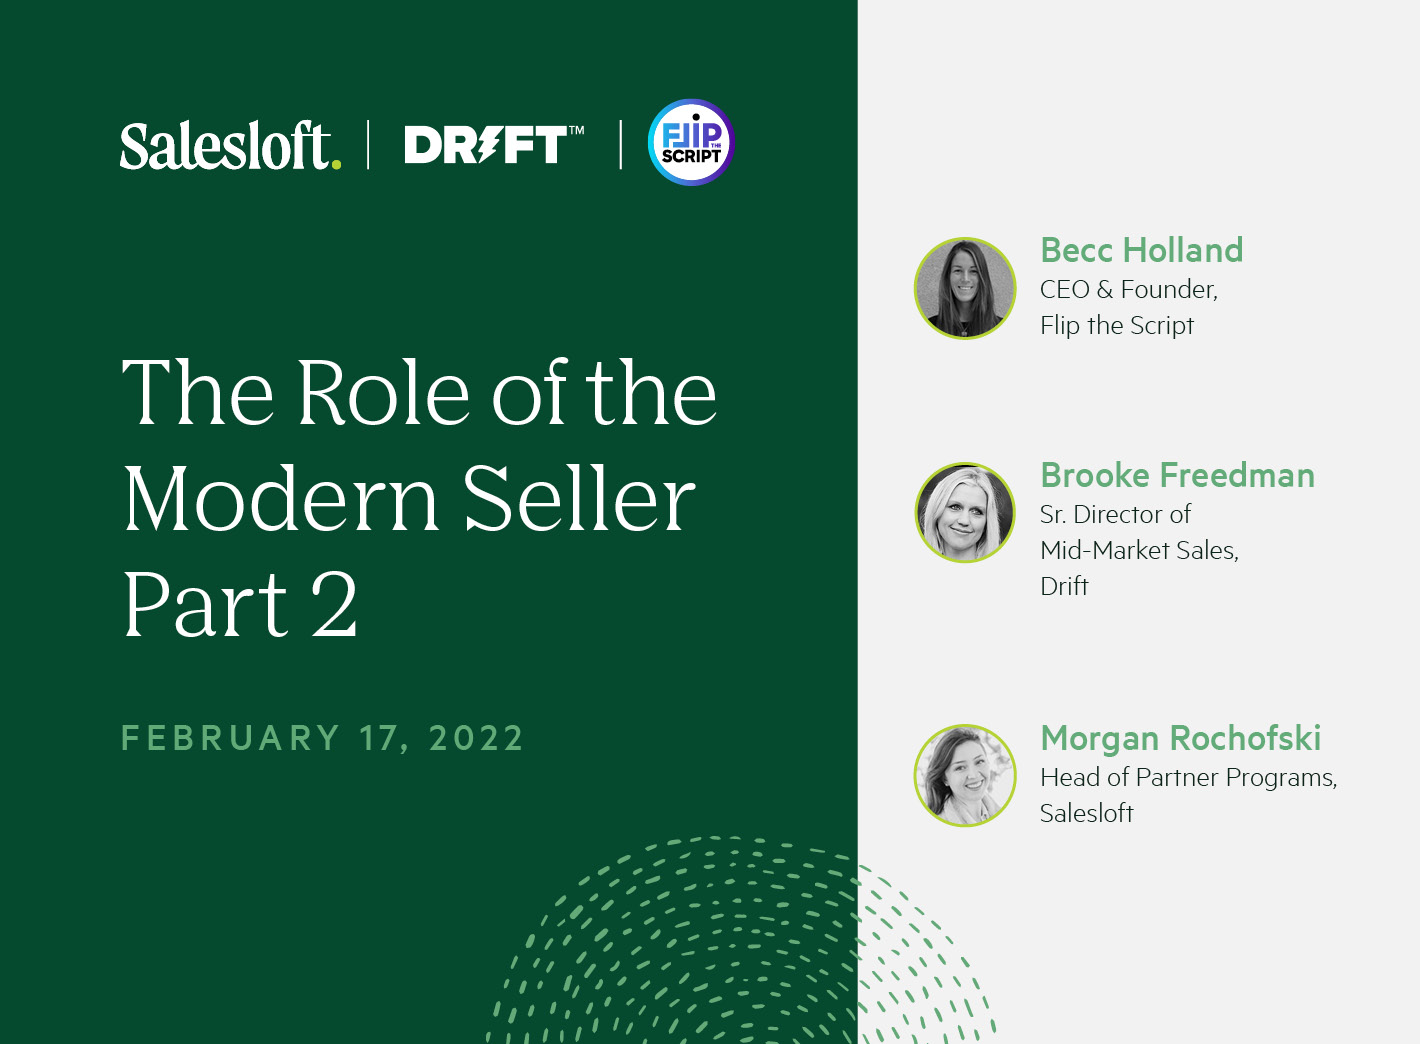 The Role of the Modern Seller - Part 2